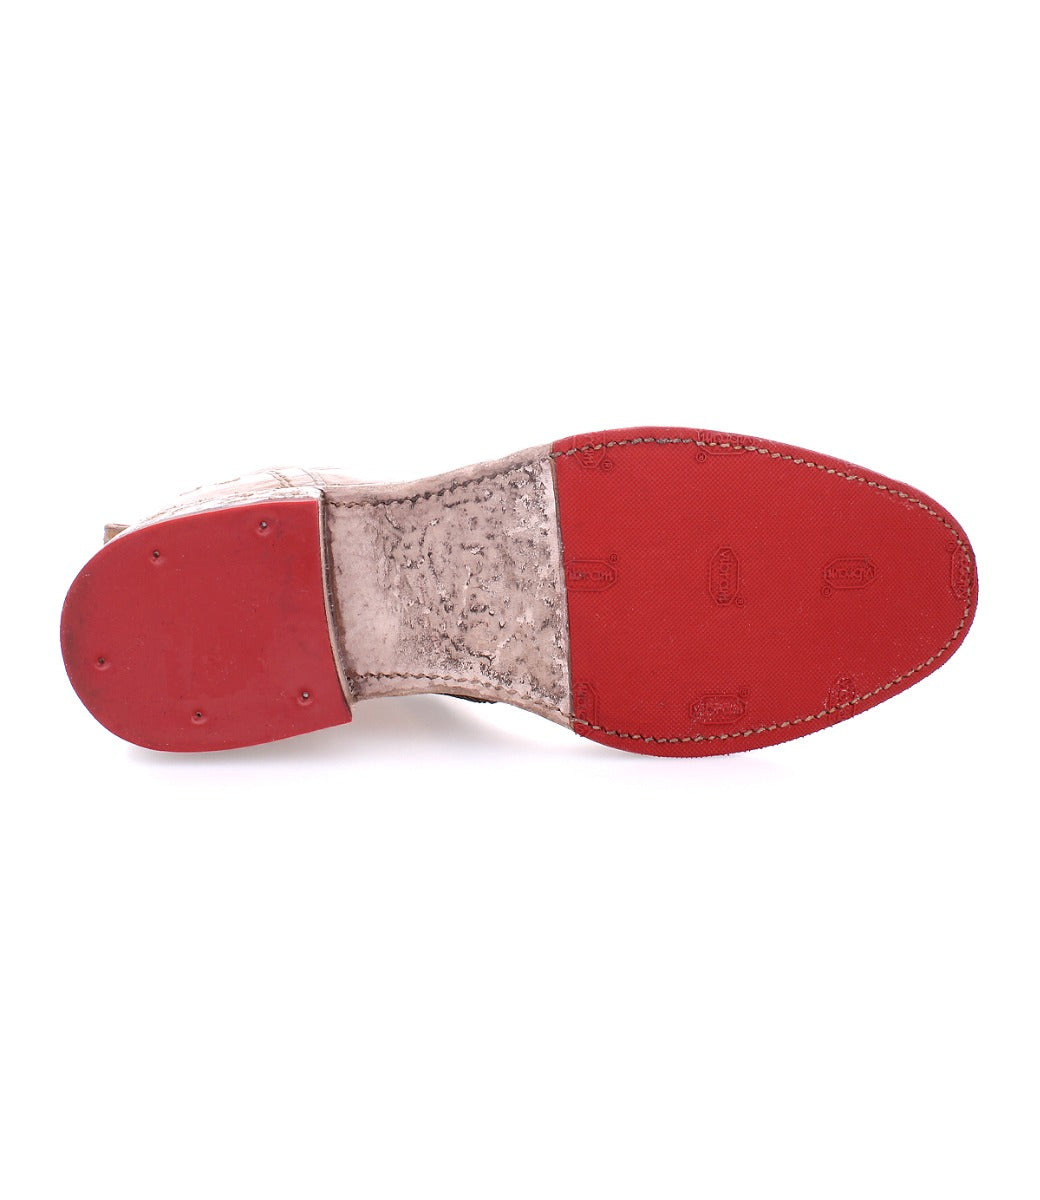 A pair of Bed Stu Tabitha shoes with red soles on a white background.